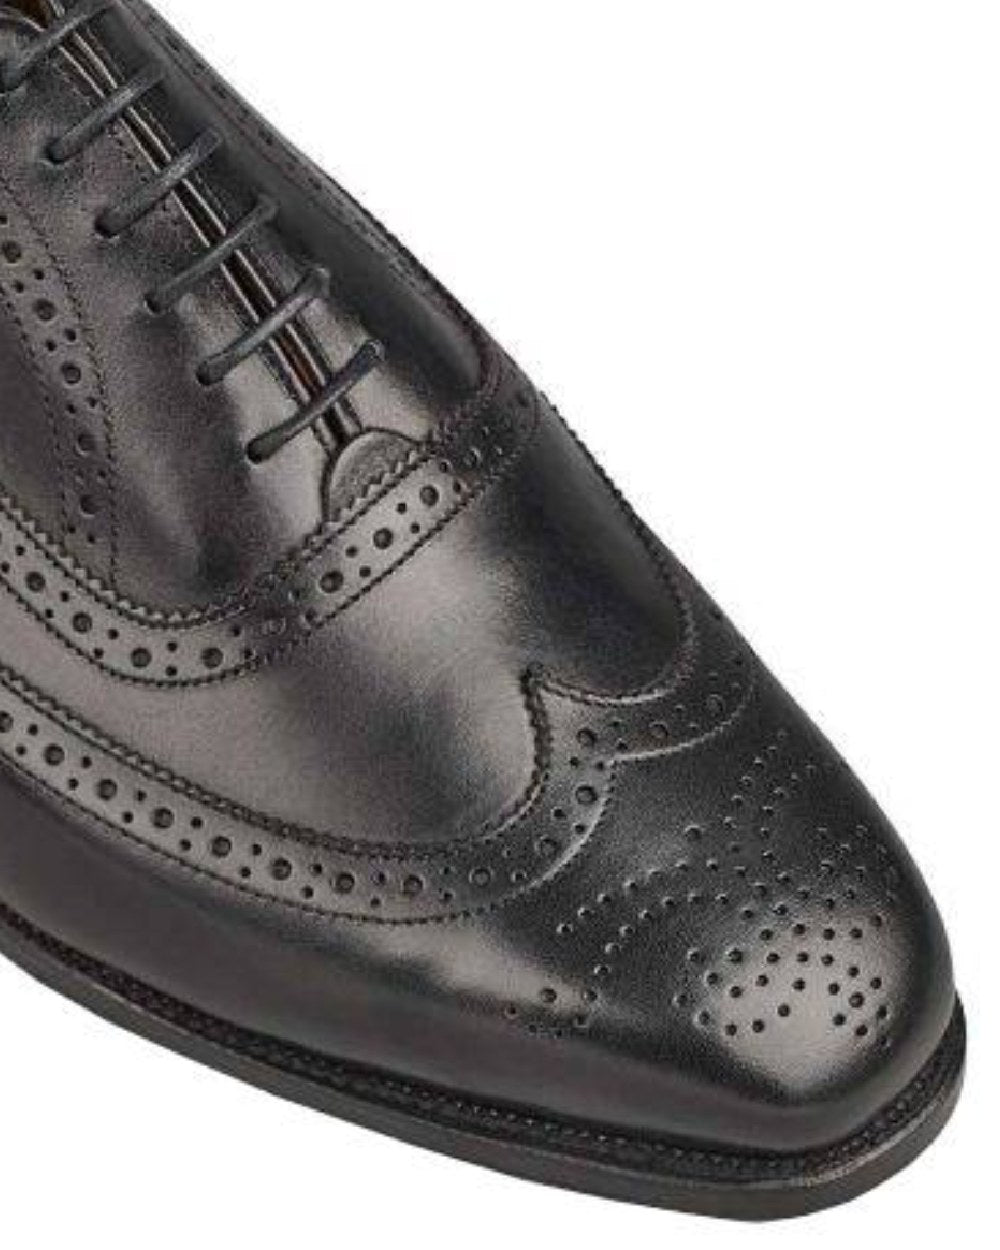 Black Coloured Trickers Picadilly Leather Sole Brogue Oxford City Shoe On A White Background 